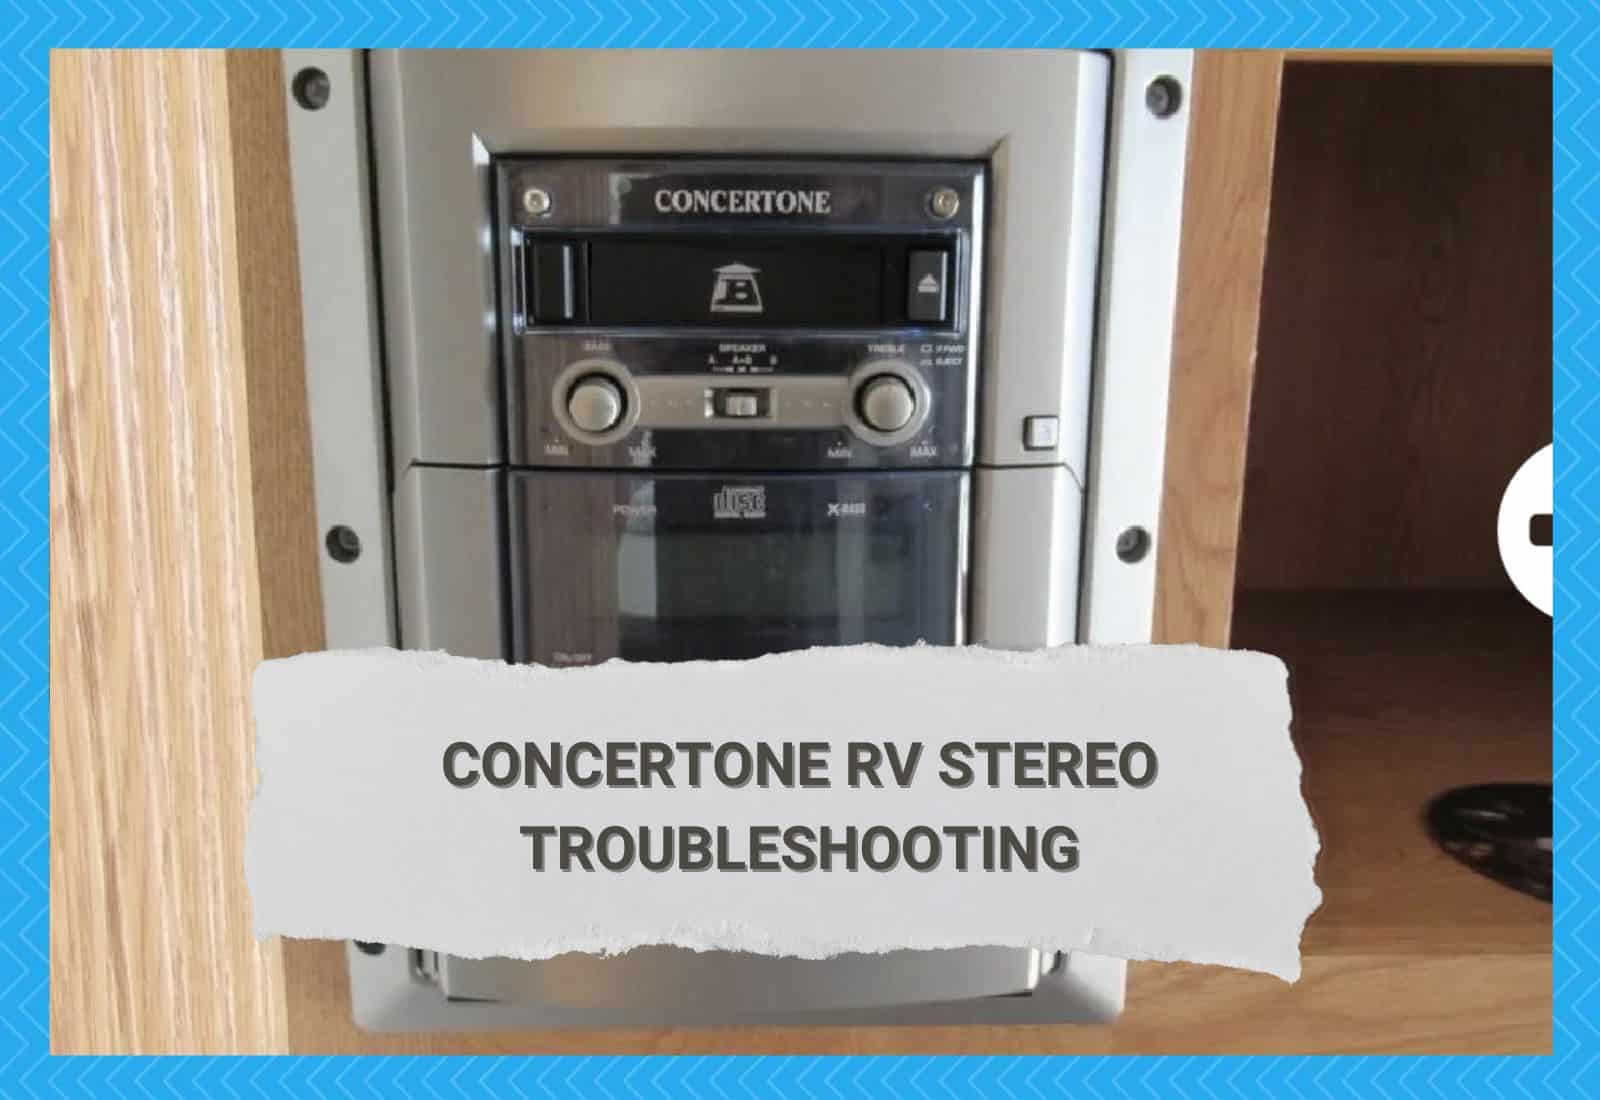 Concertone RV Stereo Troubleshooting